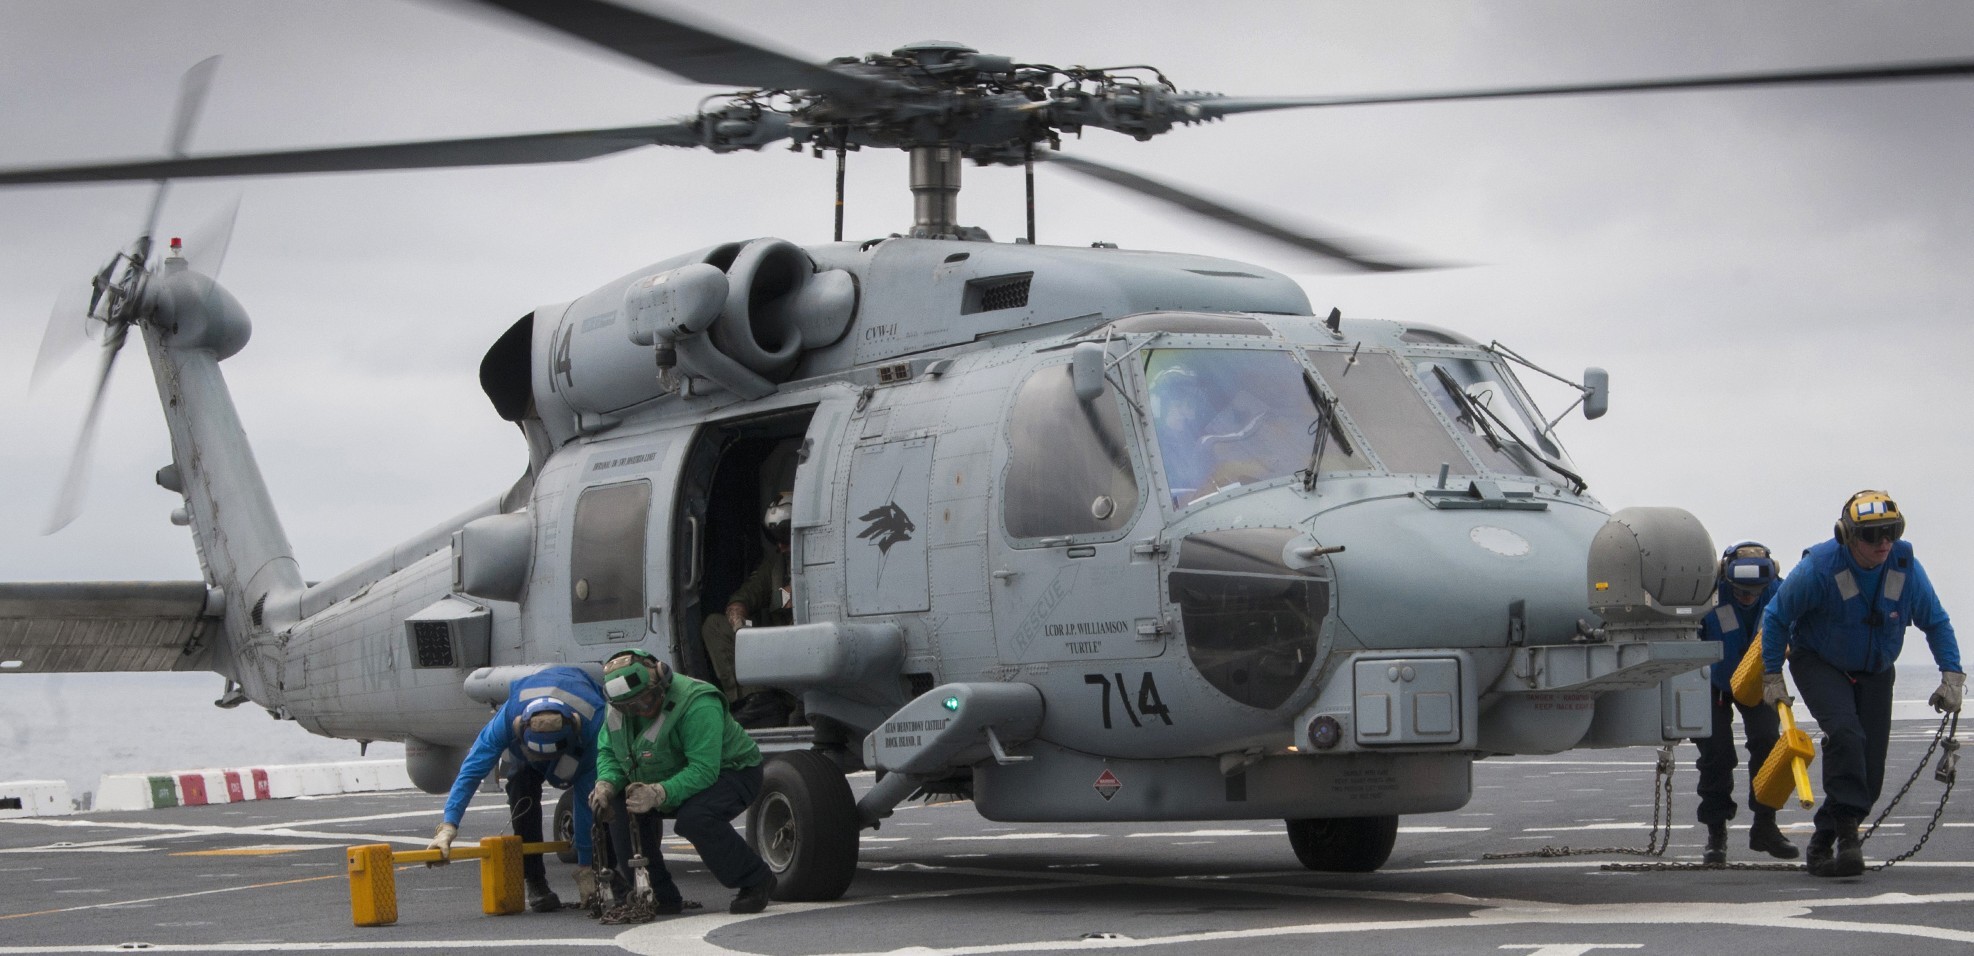 hsm-75 wolfpack helicopter maritime strike squadron us navy mh-60r seahawk 2015 56 uss somerset lpd-25